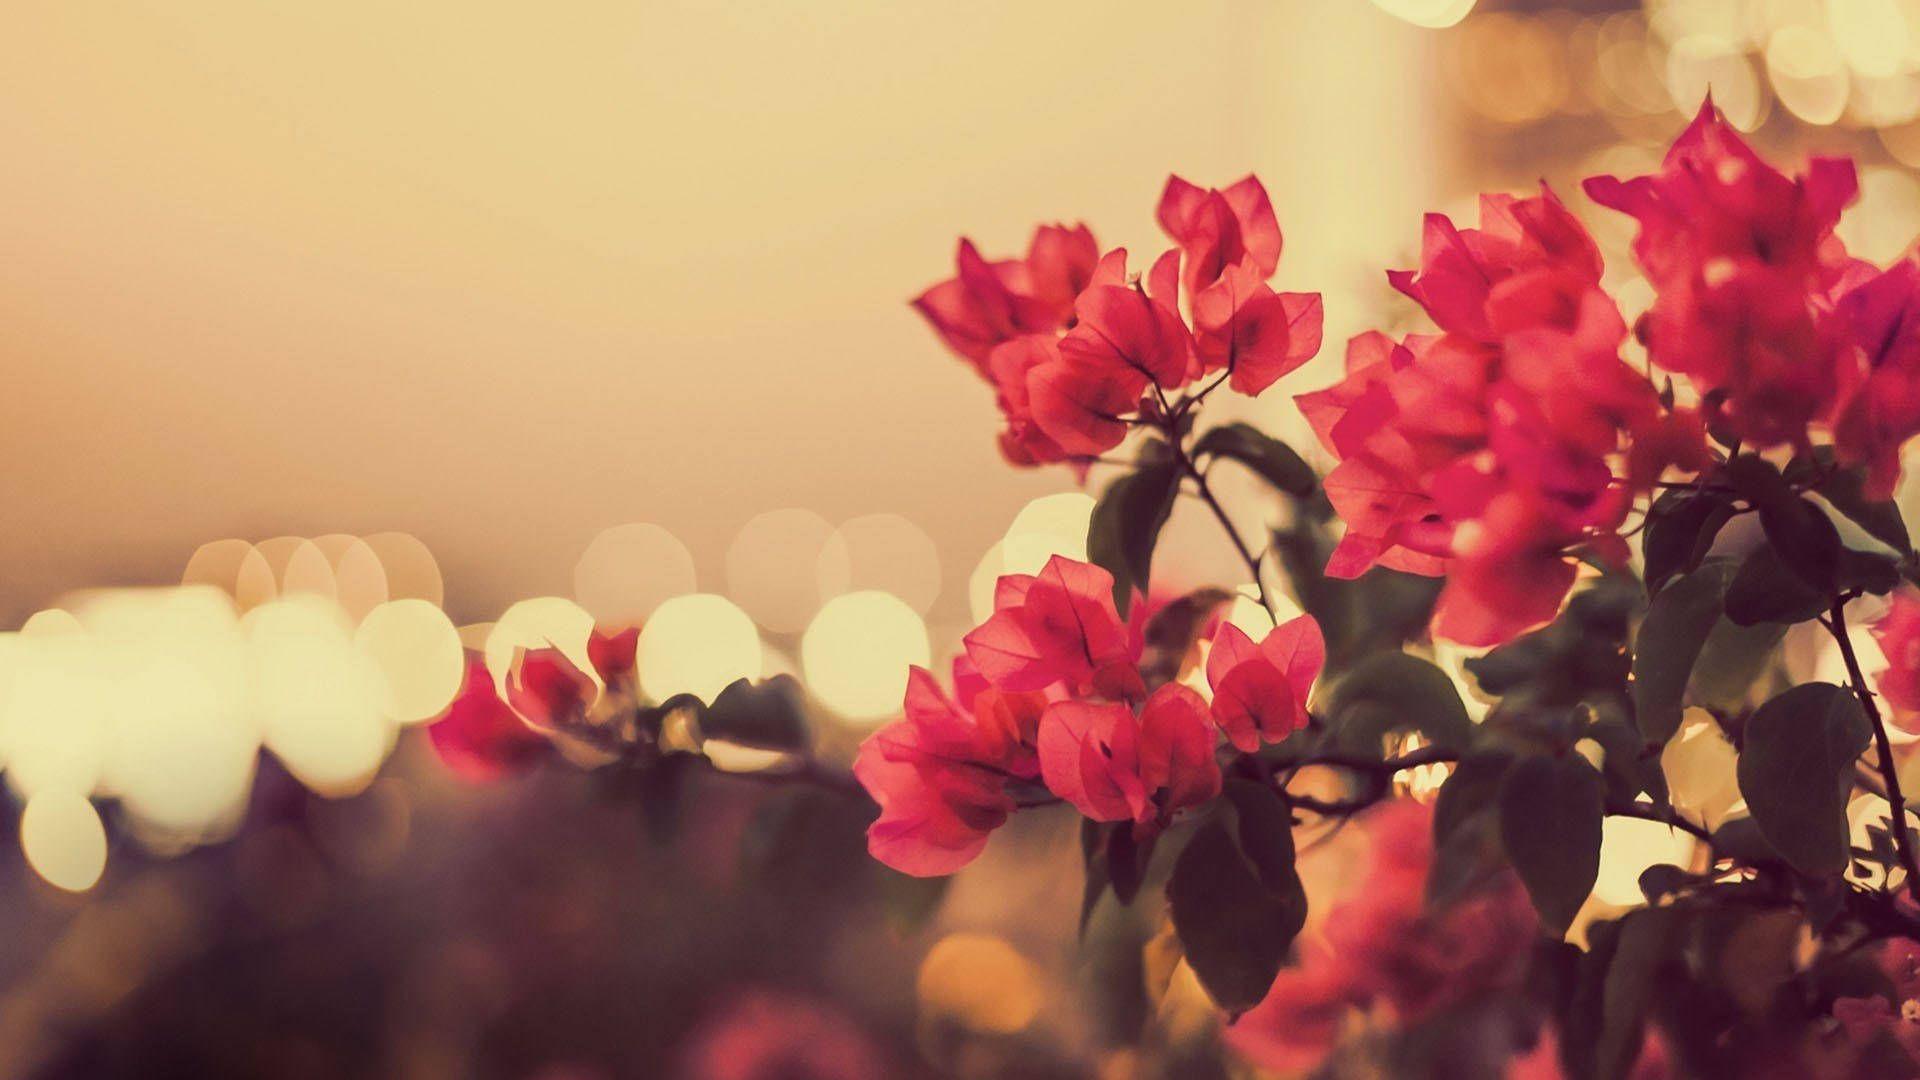 Red flowers in the sunset wallpaper 1920x1080 Red flowers in the sunset wallpaper - Vintage